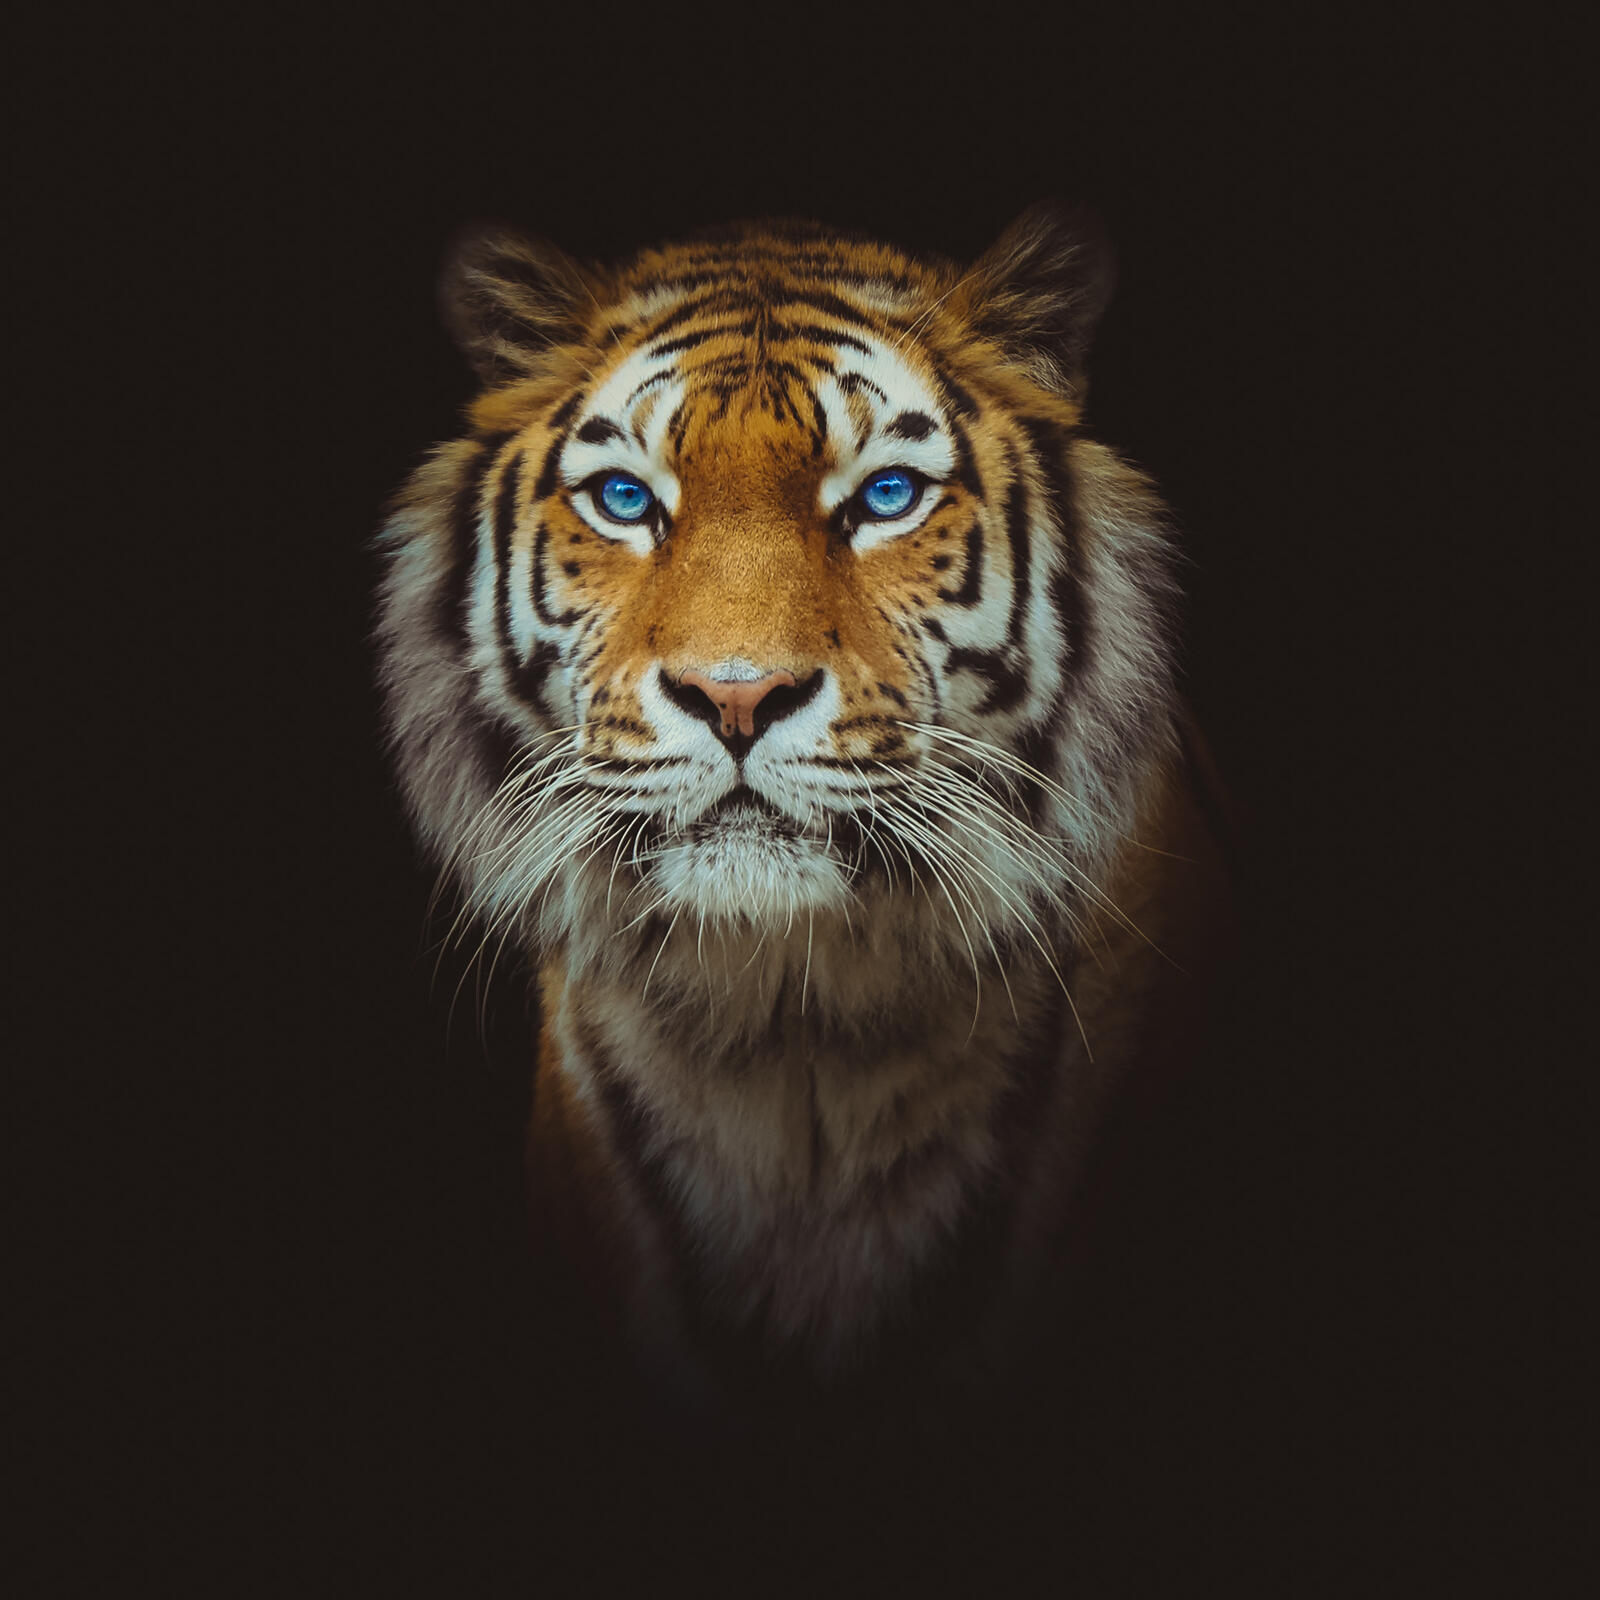 Wallpapers tiger face animal on the desktop